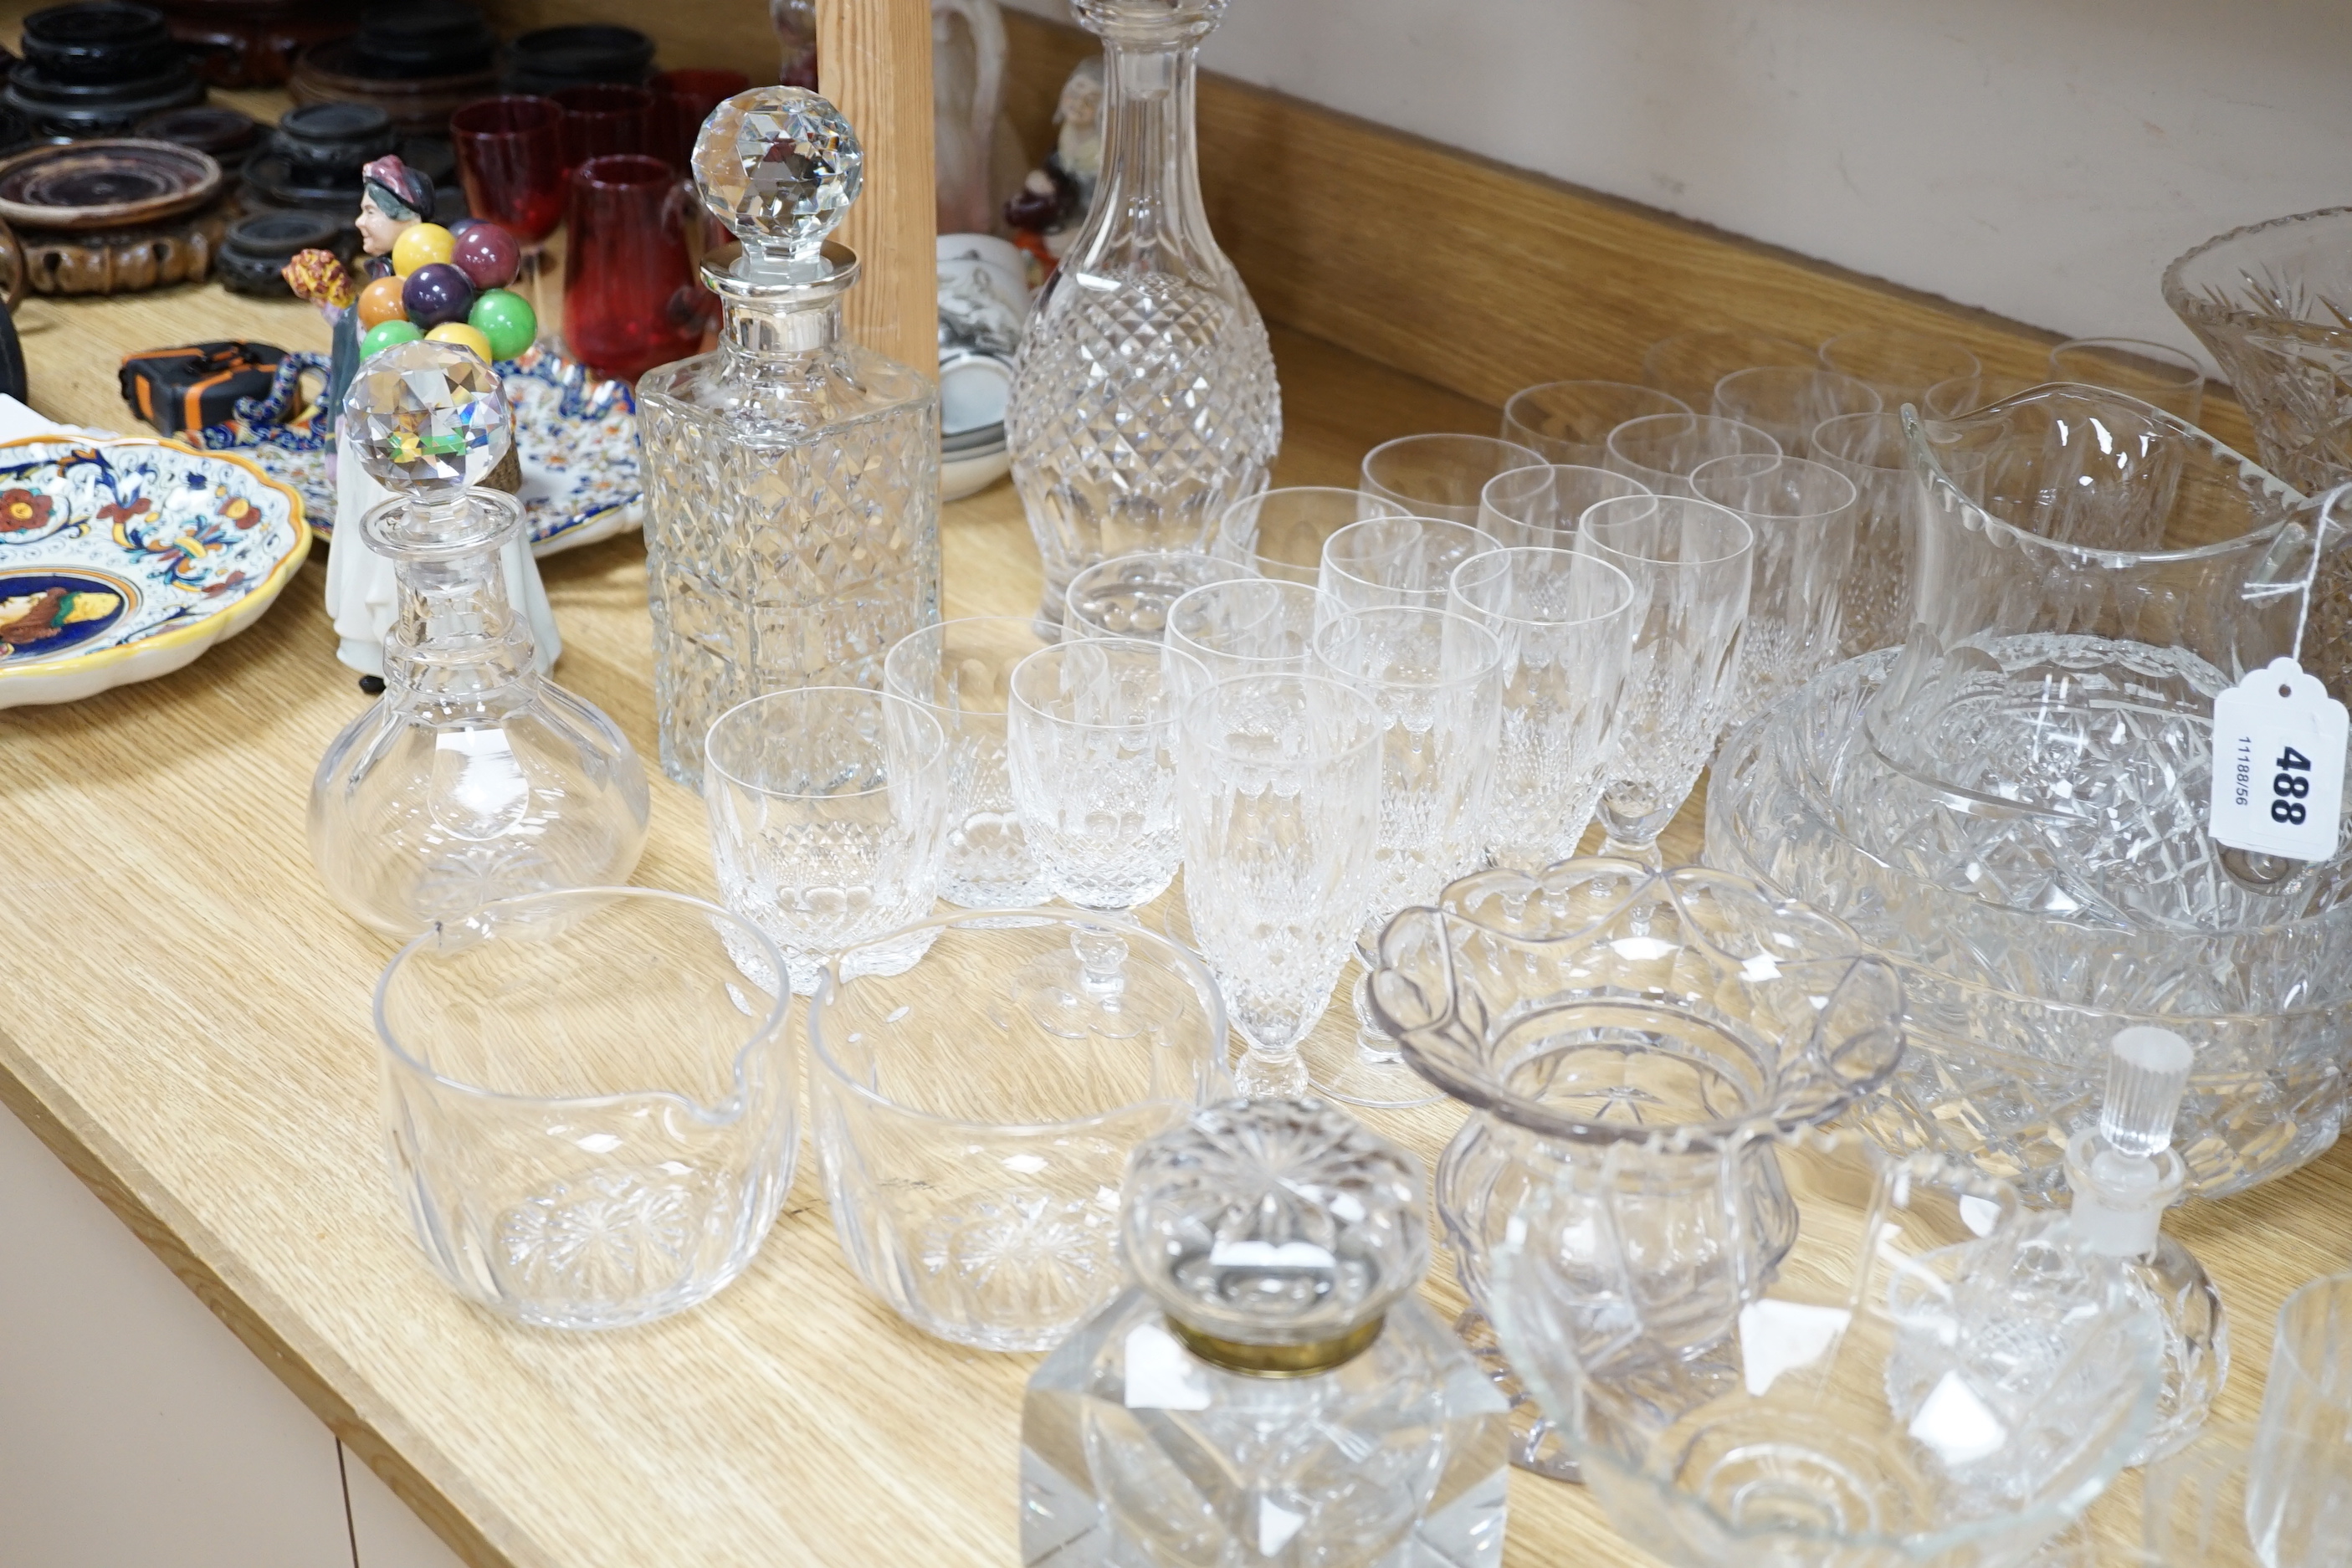 A Waterford cut crystal ‘’Colleen’’ pattern part suite of drinking glassware, together with a matching water jug and decanter and other glassware